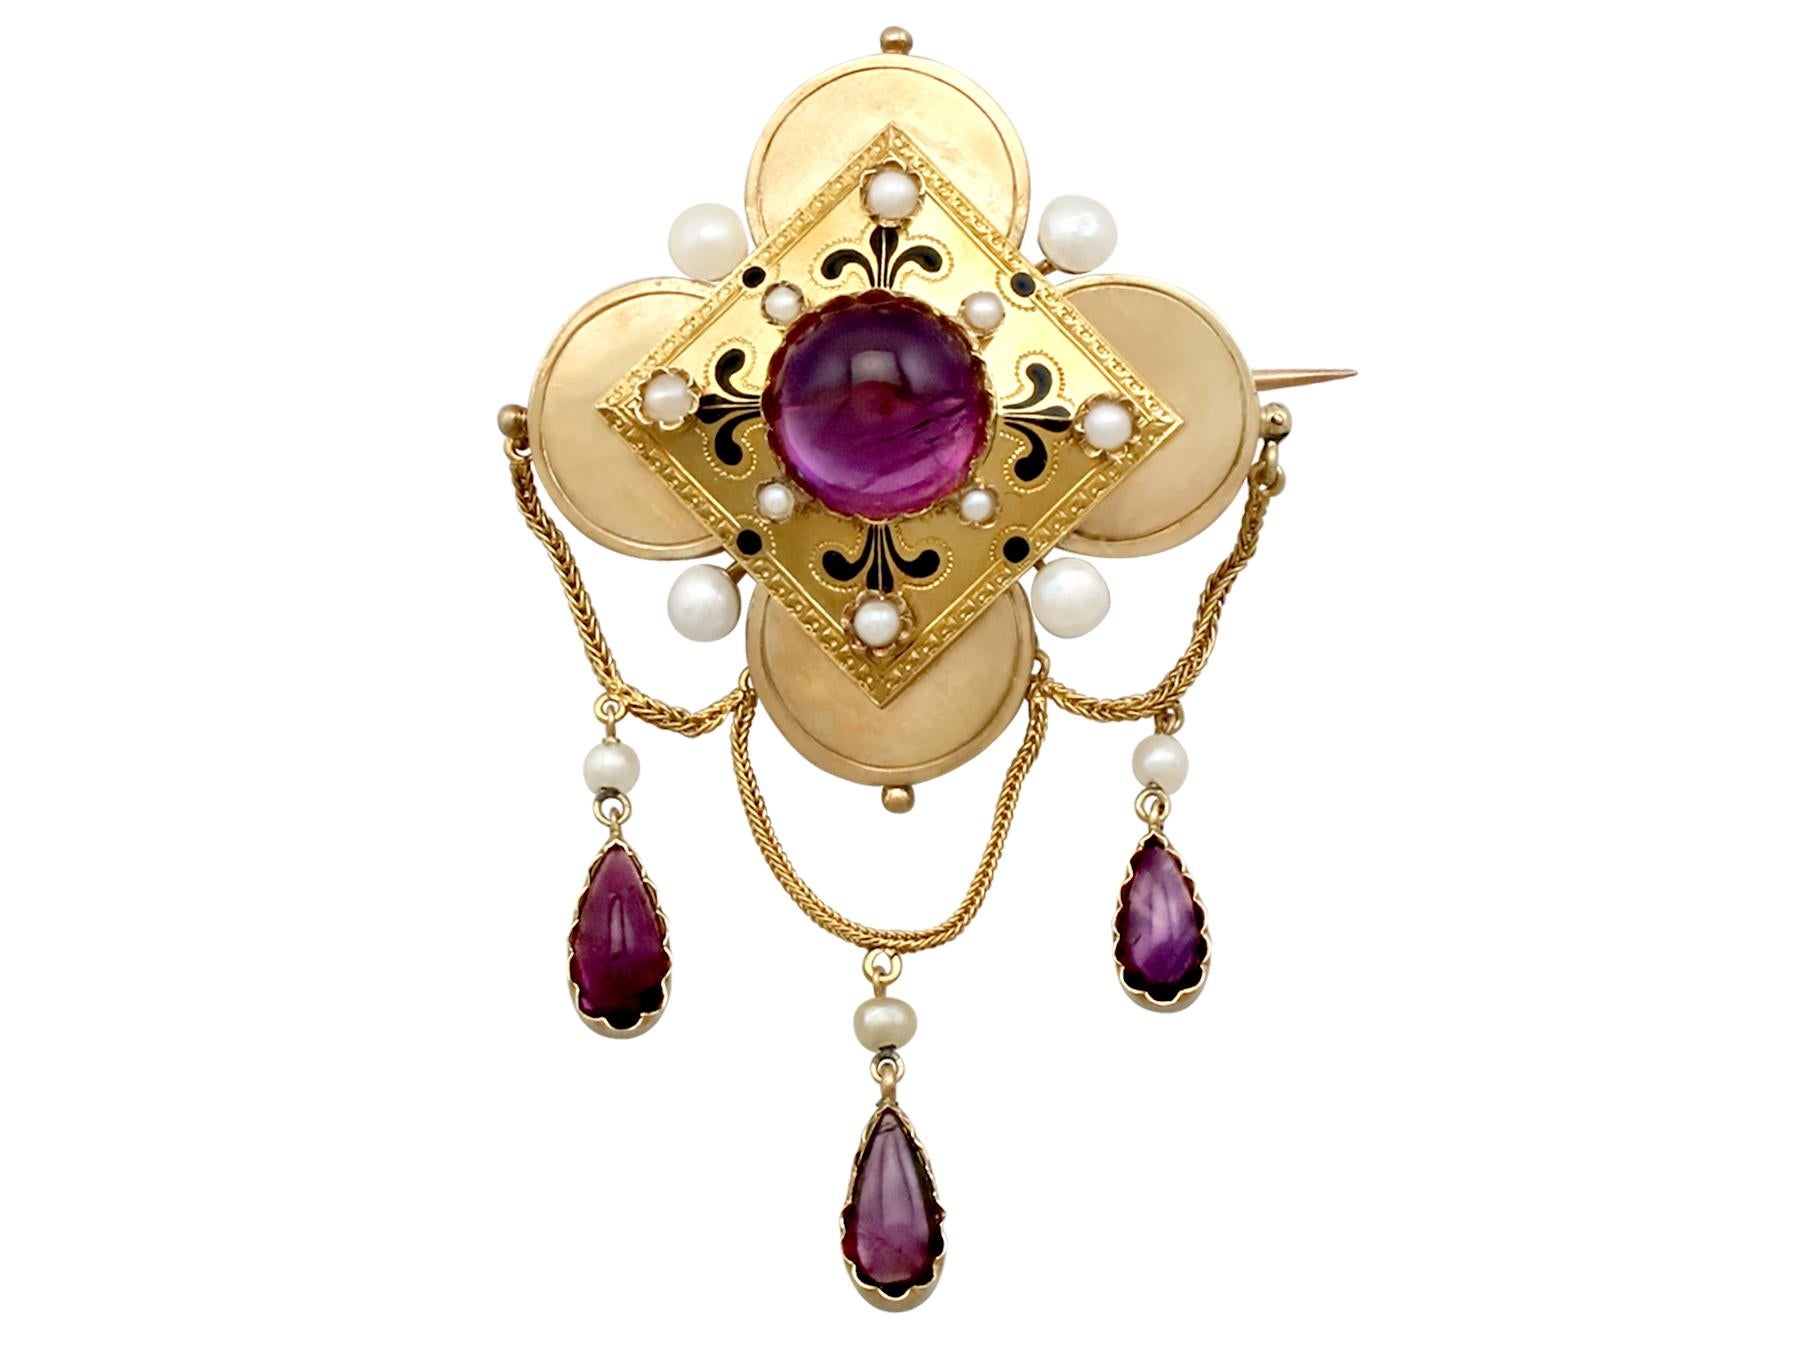 Women's 11.54 Carat Amethyst and Pearl Yellow Gold Jewelry Suite, Antique